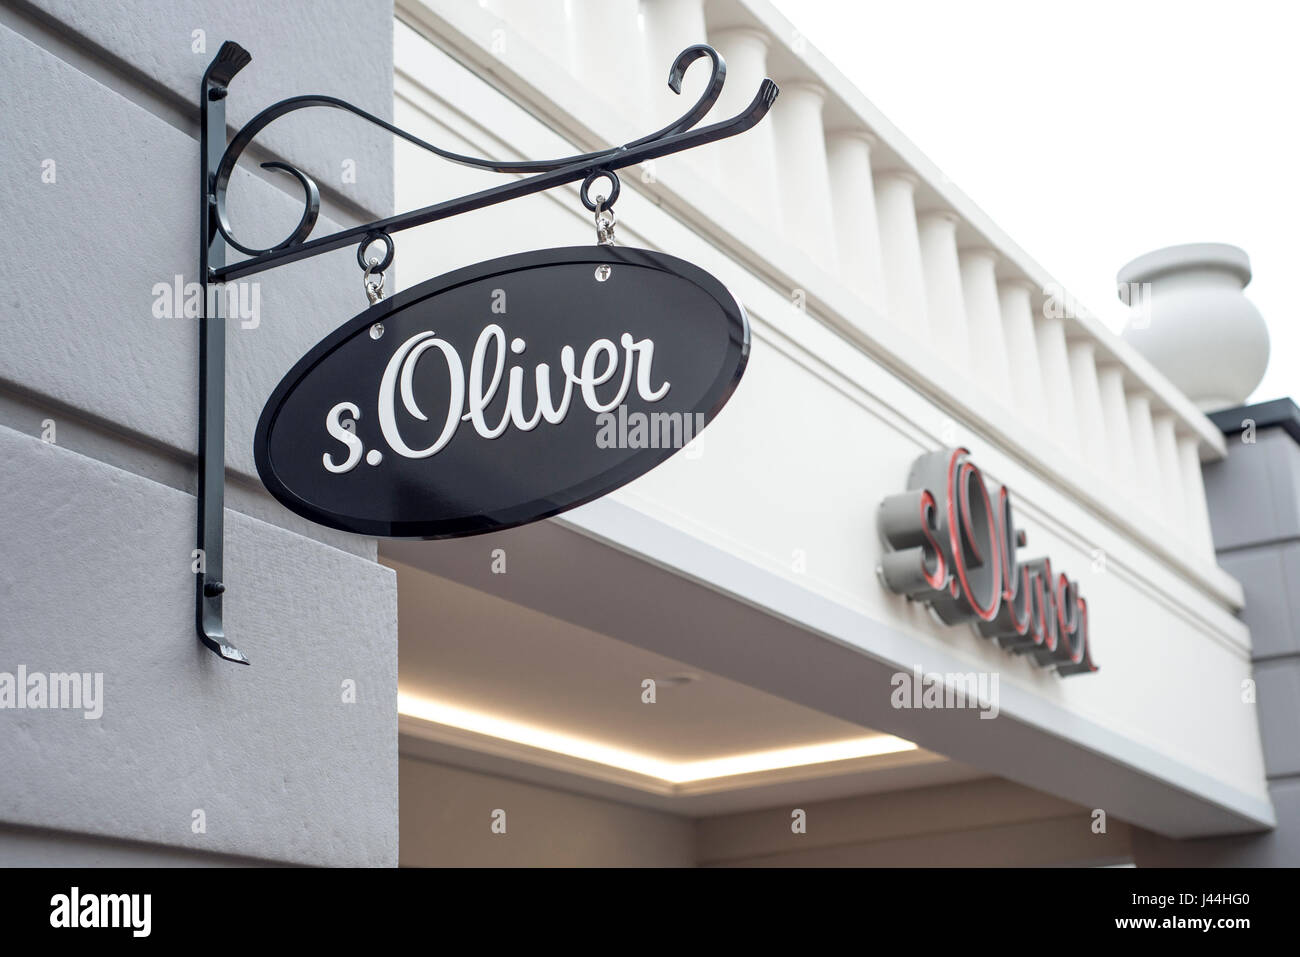 S Oliver High Resolution Stock Photography and Images - Alamy